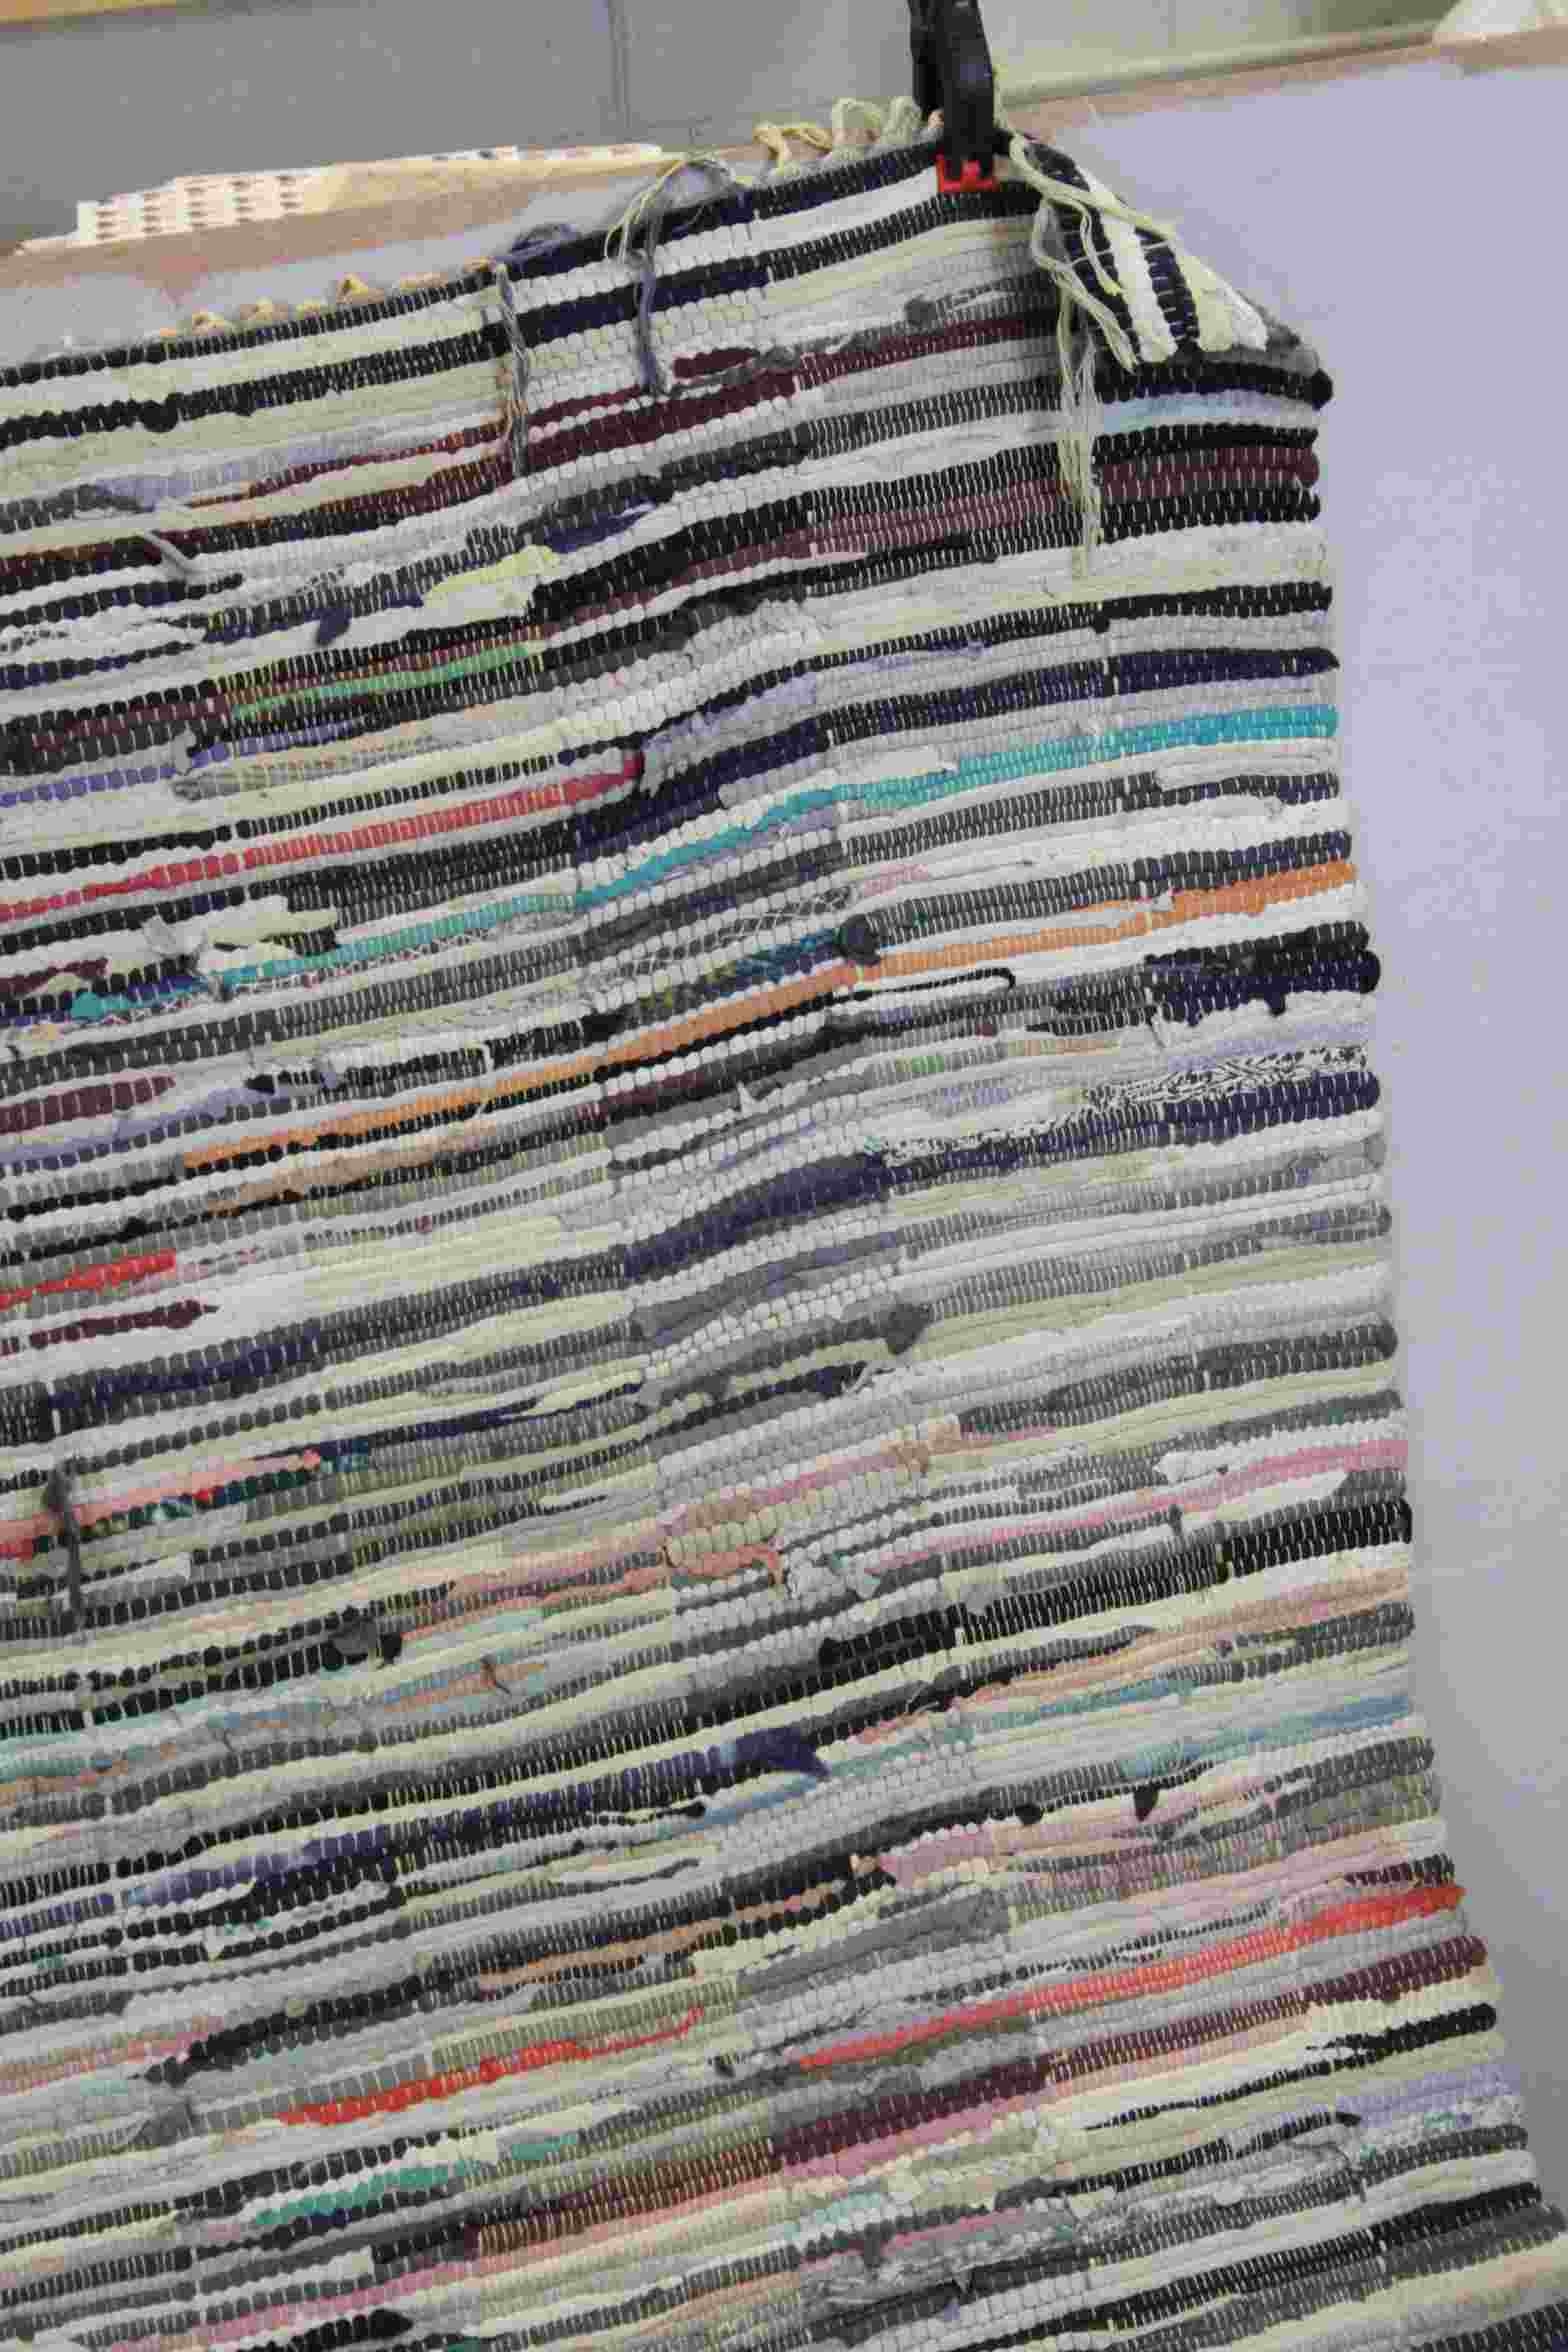 Hand Knotted Kelim Style Mulit-coloured Striped Rug, approx. 215cms x 140cms - Image 3 of 4